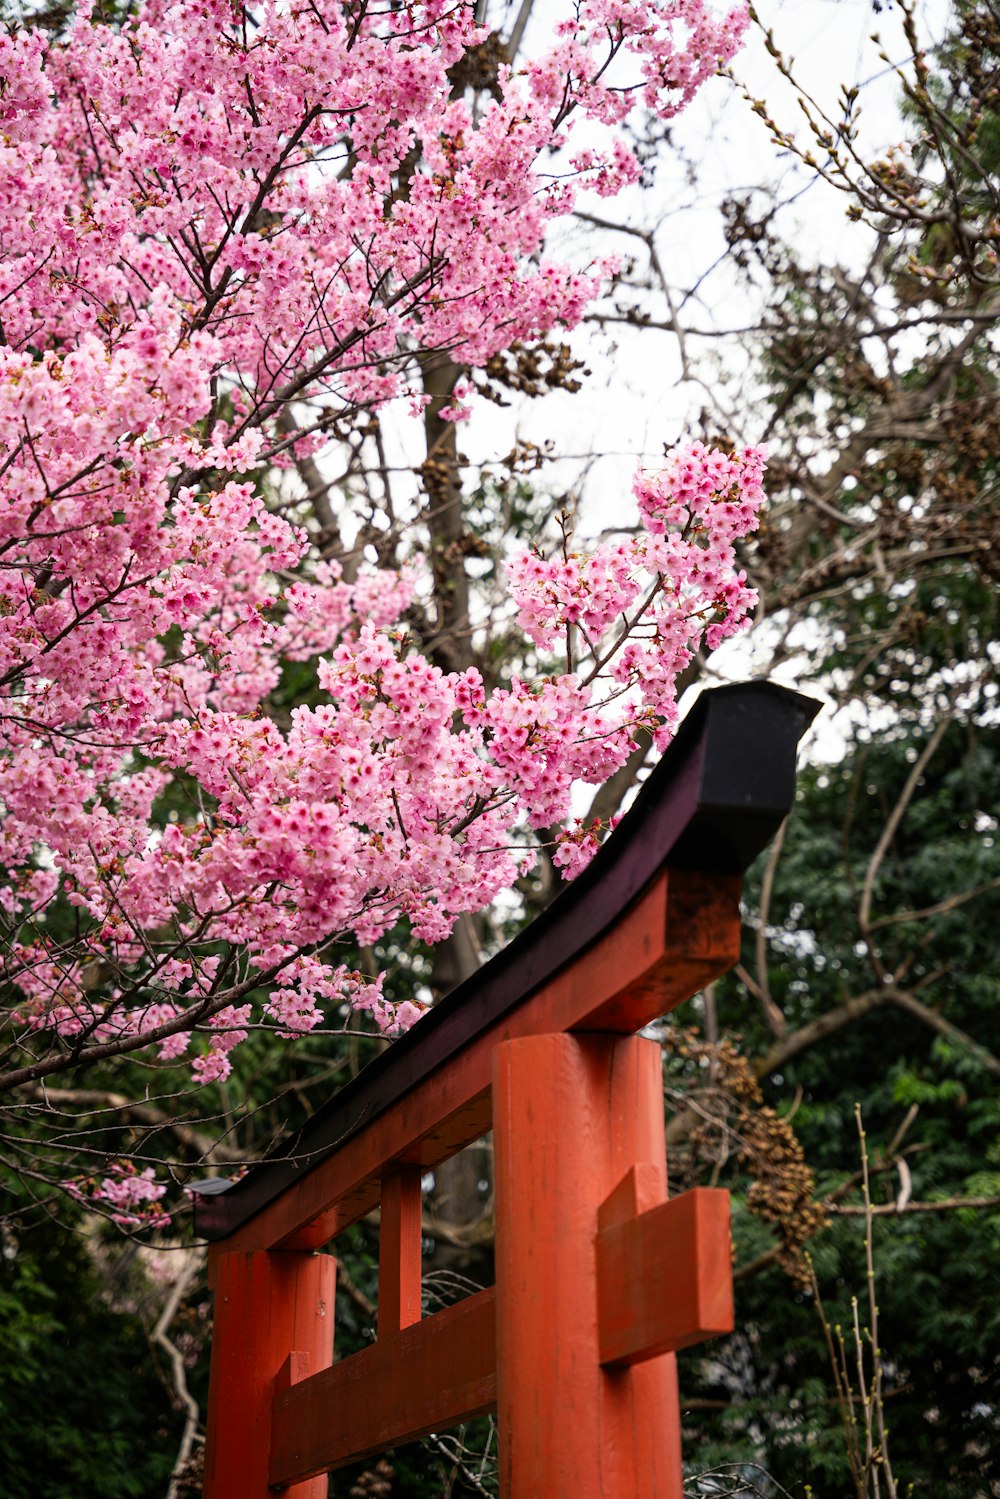 a red wooden bench under a tree with pink flowers